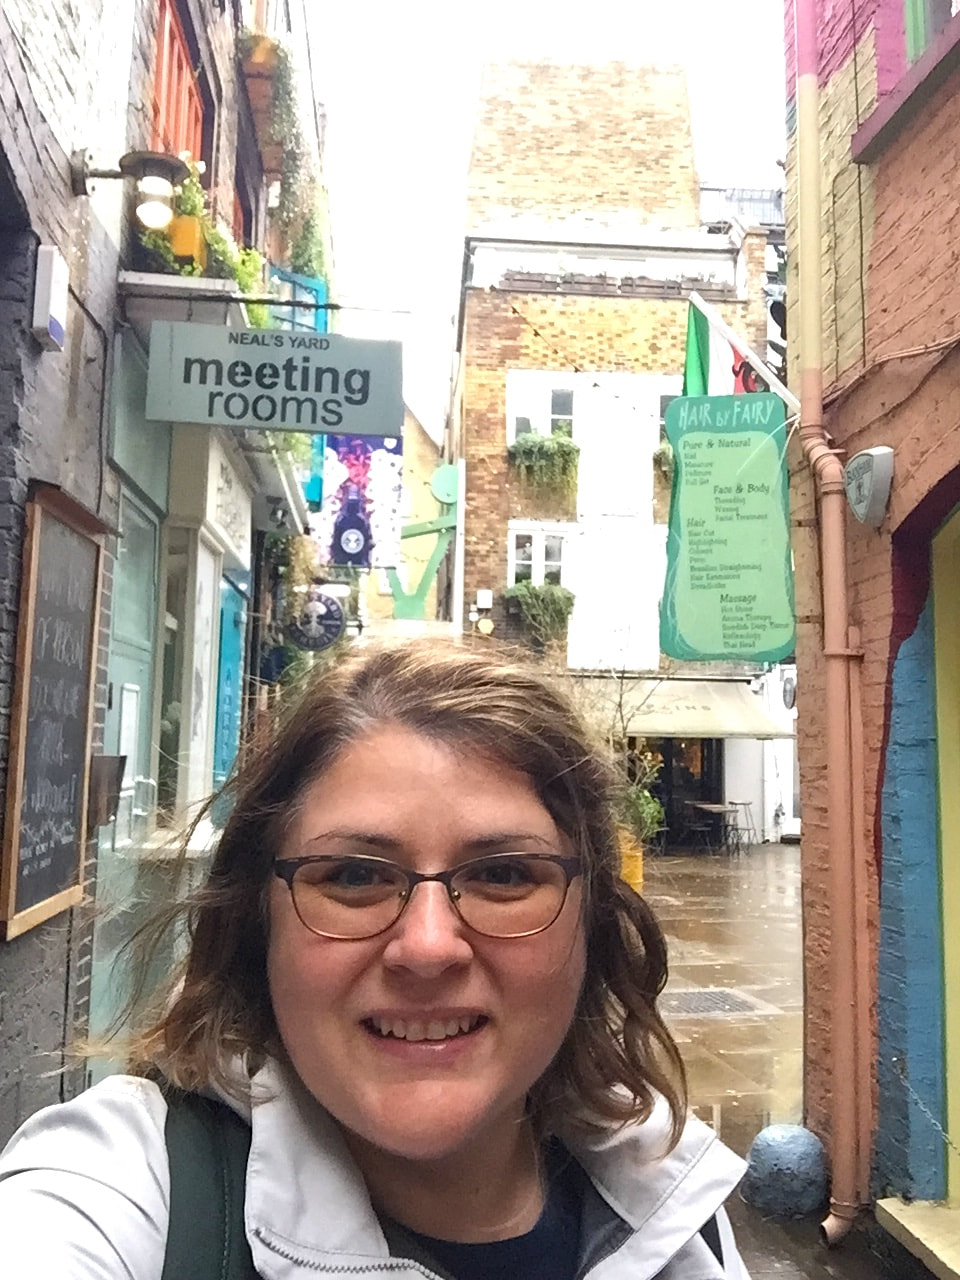 Selfie of Vanessa wearing a light grey raincoat, with the buildings of Neal's Yard in the background.Picture